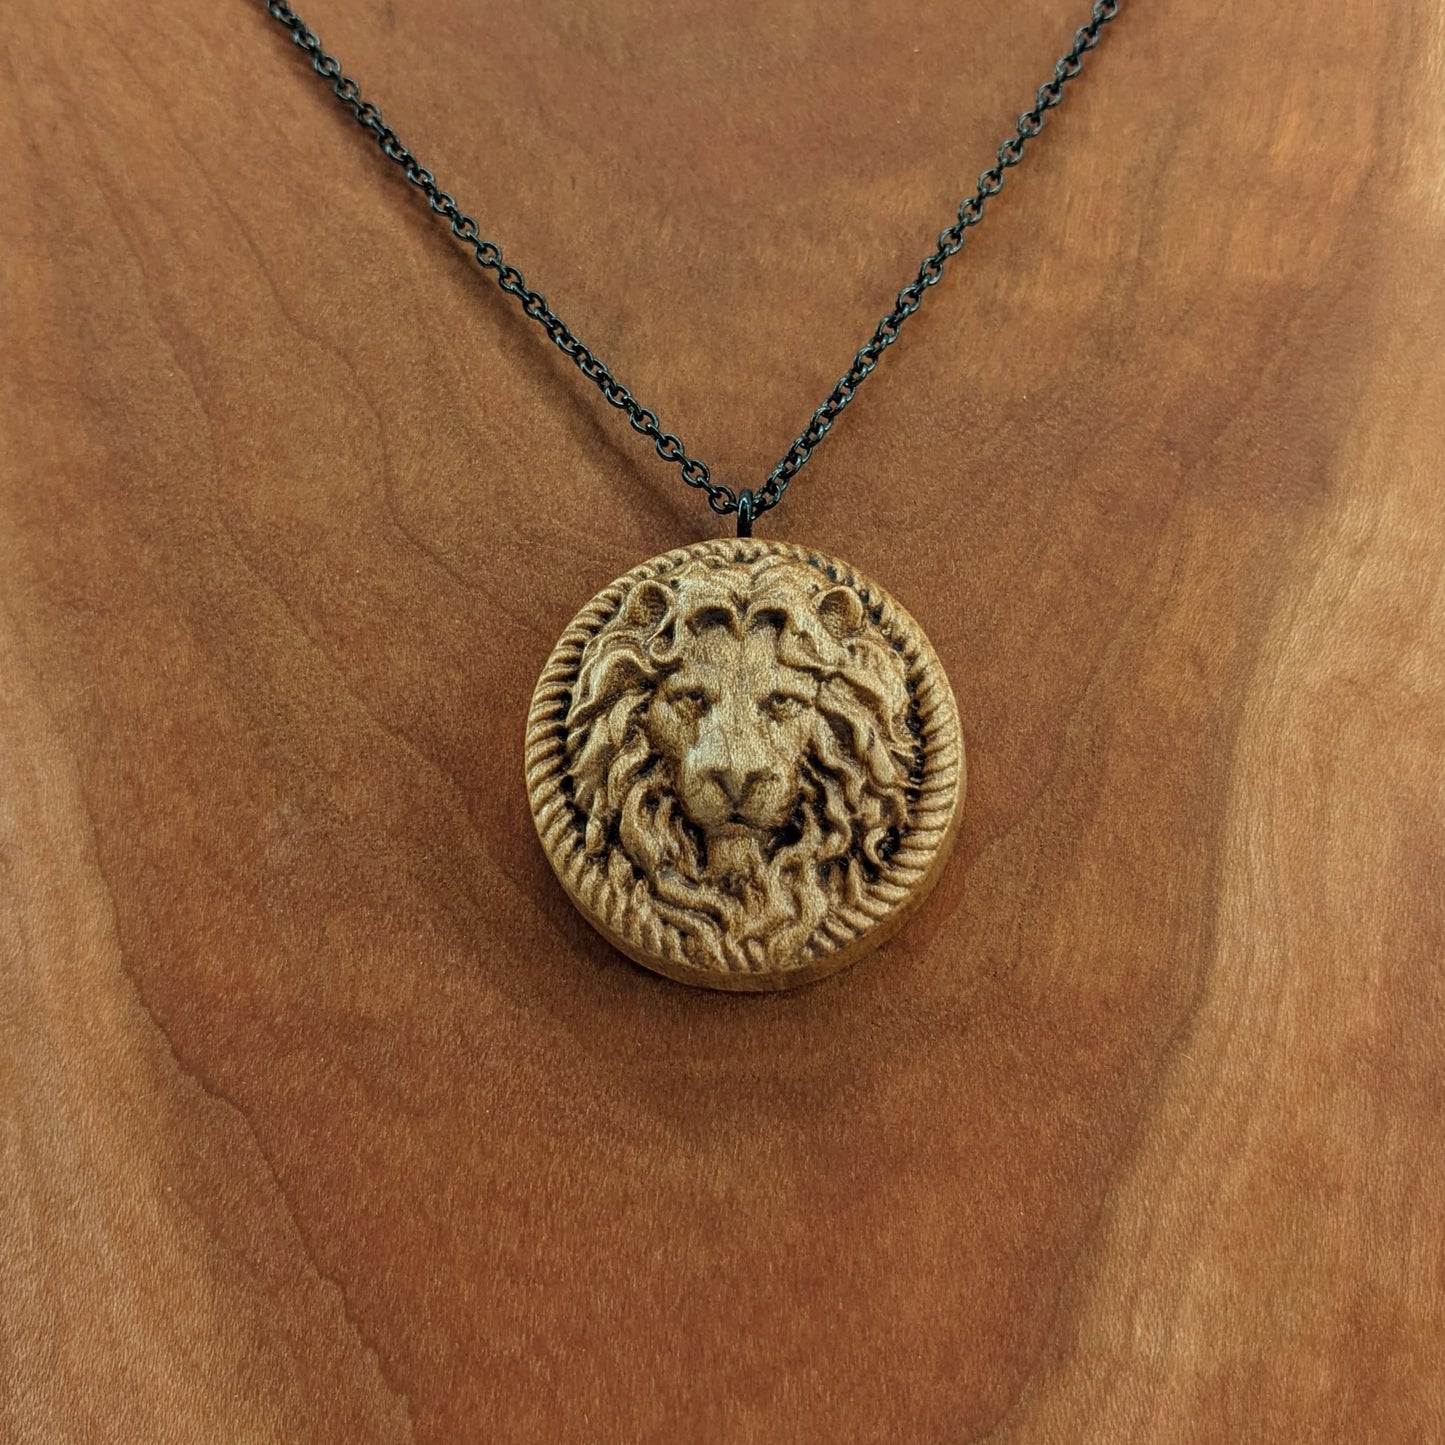 Wooden necklace pendant carved in the shape of a stern lion face surrounded by a rope border. Hanging from a black stainless steel chain against a cherry wood background.